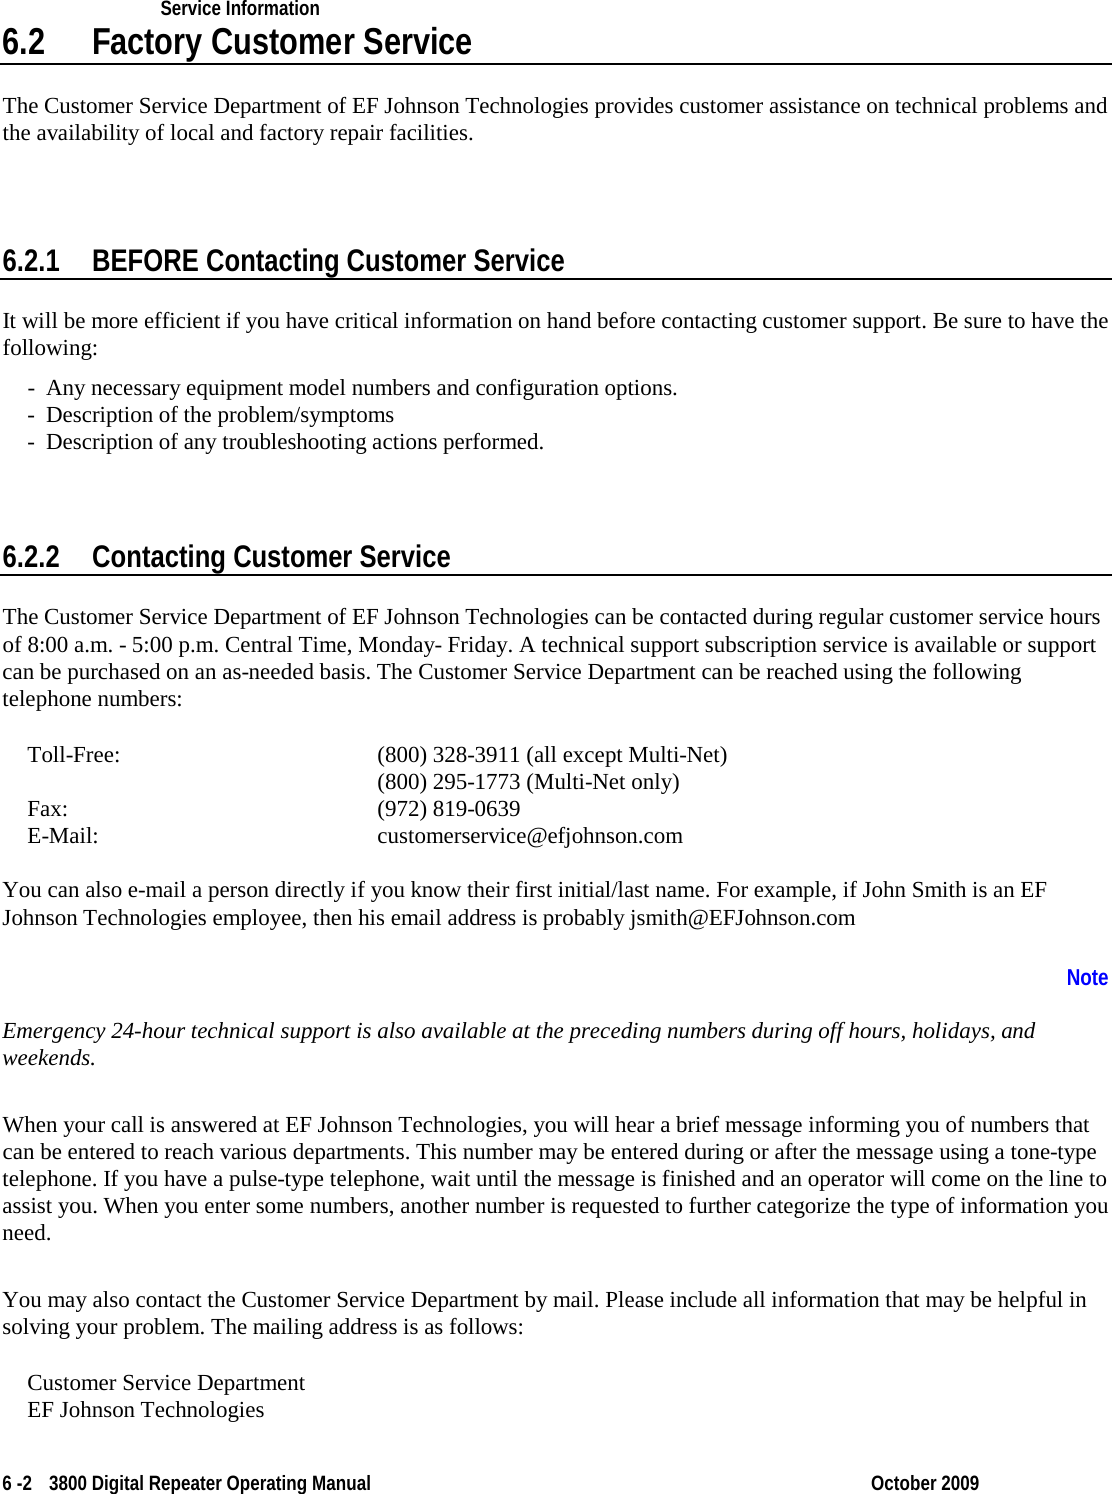    Service Information    6 -2  3800 Digital Repeater Operating Manual October 2009 6.2 Factory Customer Service The Customer Service Department of EF Johnson Technologies provides customer assistance on technical problems and the availability of local and factory repair facilities.  6.2.1 BEFORE Contacting Customer Service It will be more efficient if you have critical information on hand before contacting customer support. Be sure to have the following: - Any necessary equipment model numbers and configuration options. - Description of the problem/symptoms - Description of any troubleshooting actions performed. 6.2.2 Contacting Customer Service The Customer Service Department of EF Johnson Technologies can be contacted during regular customer service hours of 8:00 a.m. - 5:00 p.m. Central Time, Monday- Friday. A technical support subscription service is available or support can be purchased on an as-needed basis. The Customer Service Department can be reached using the following telephone numbers: Toll-Free:          (800) 328-3911 (all except Multi-Net)           (800) 295-1773 (Multi-Net only) Fax:           (972) 819-0639 E-Mail:      customerservice@efjohnson.com You can also e-mail a person directly if you know their first initial/last name. For example, if John Smith is an EF Johnson Technologies employee, then his email address is probably jsmith@EFJohnson.com Emergency 24-hour technical support is also available at the preceding numbers during off hours, holidays, and weekends.  Note  When your call is answered at EF Johnson Technologies, you will hear a brief message informing you of numbers that can be entered to reach various departments. This number may be entered during or after the message using a tone-type telephone. If you have a pulse-type telephone, wait until the message is finished and an operator will come on the line to assist you. When you enter some numbers, another number is requested to further categorize the type of information you need.  You may also contact the Customer Service Department by mail. Please include all information that may be helpful in solving your problem. The mailing address is as follows:  Customer Service Department EF Johnson Technologies 